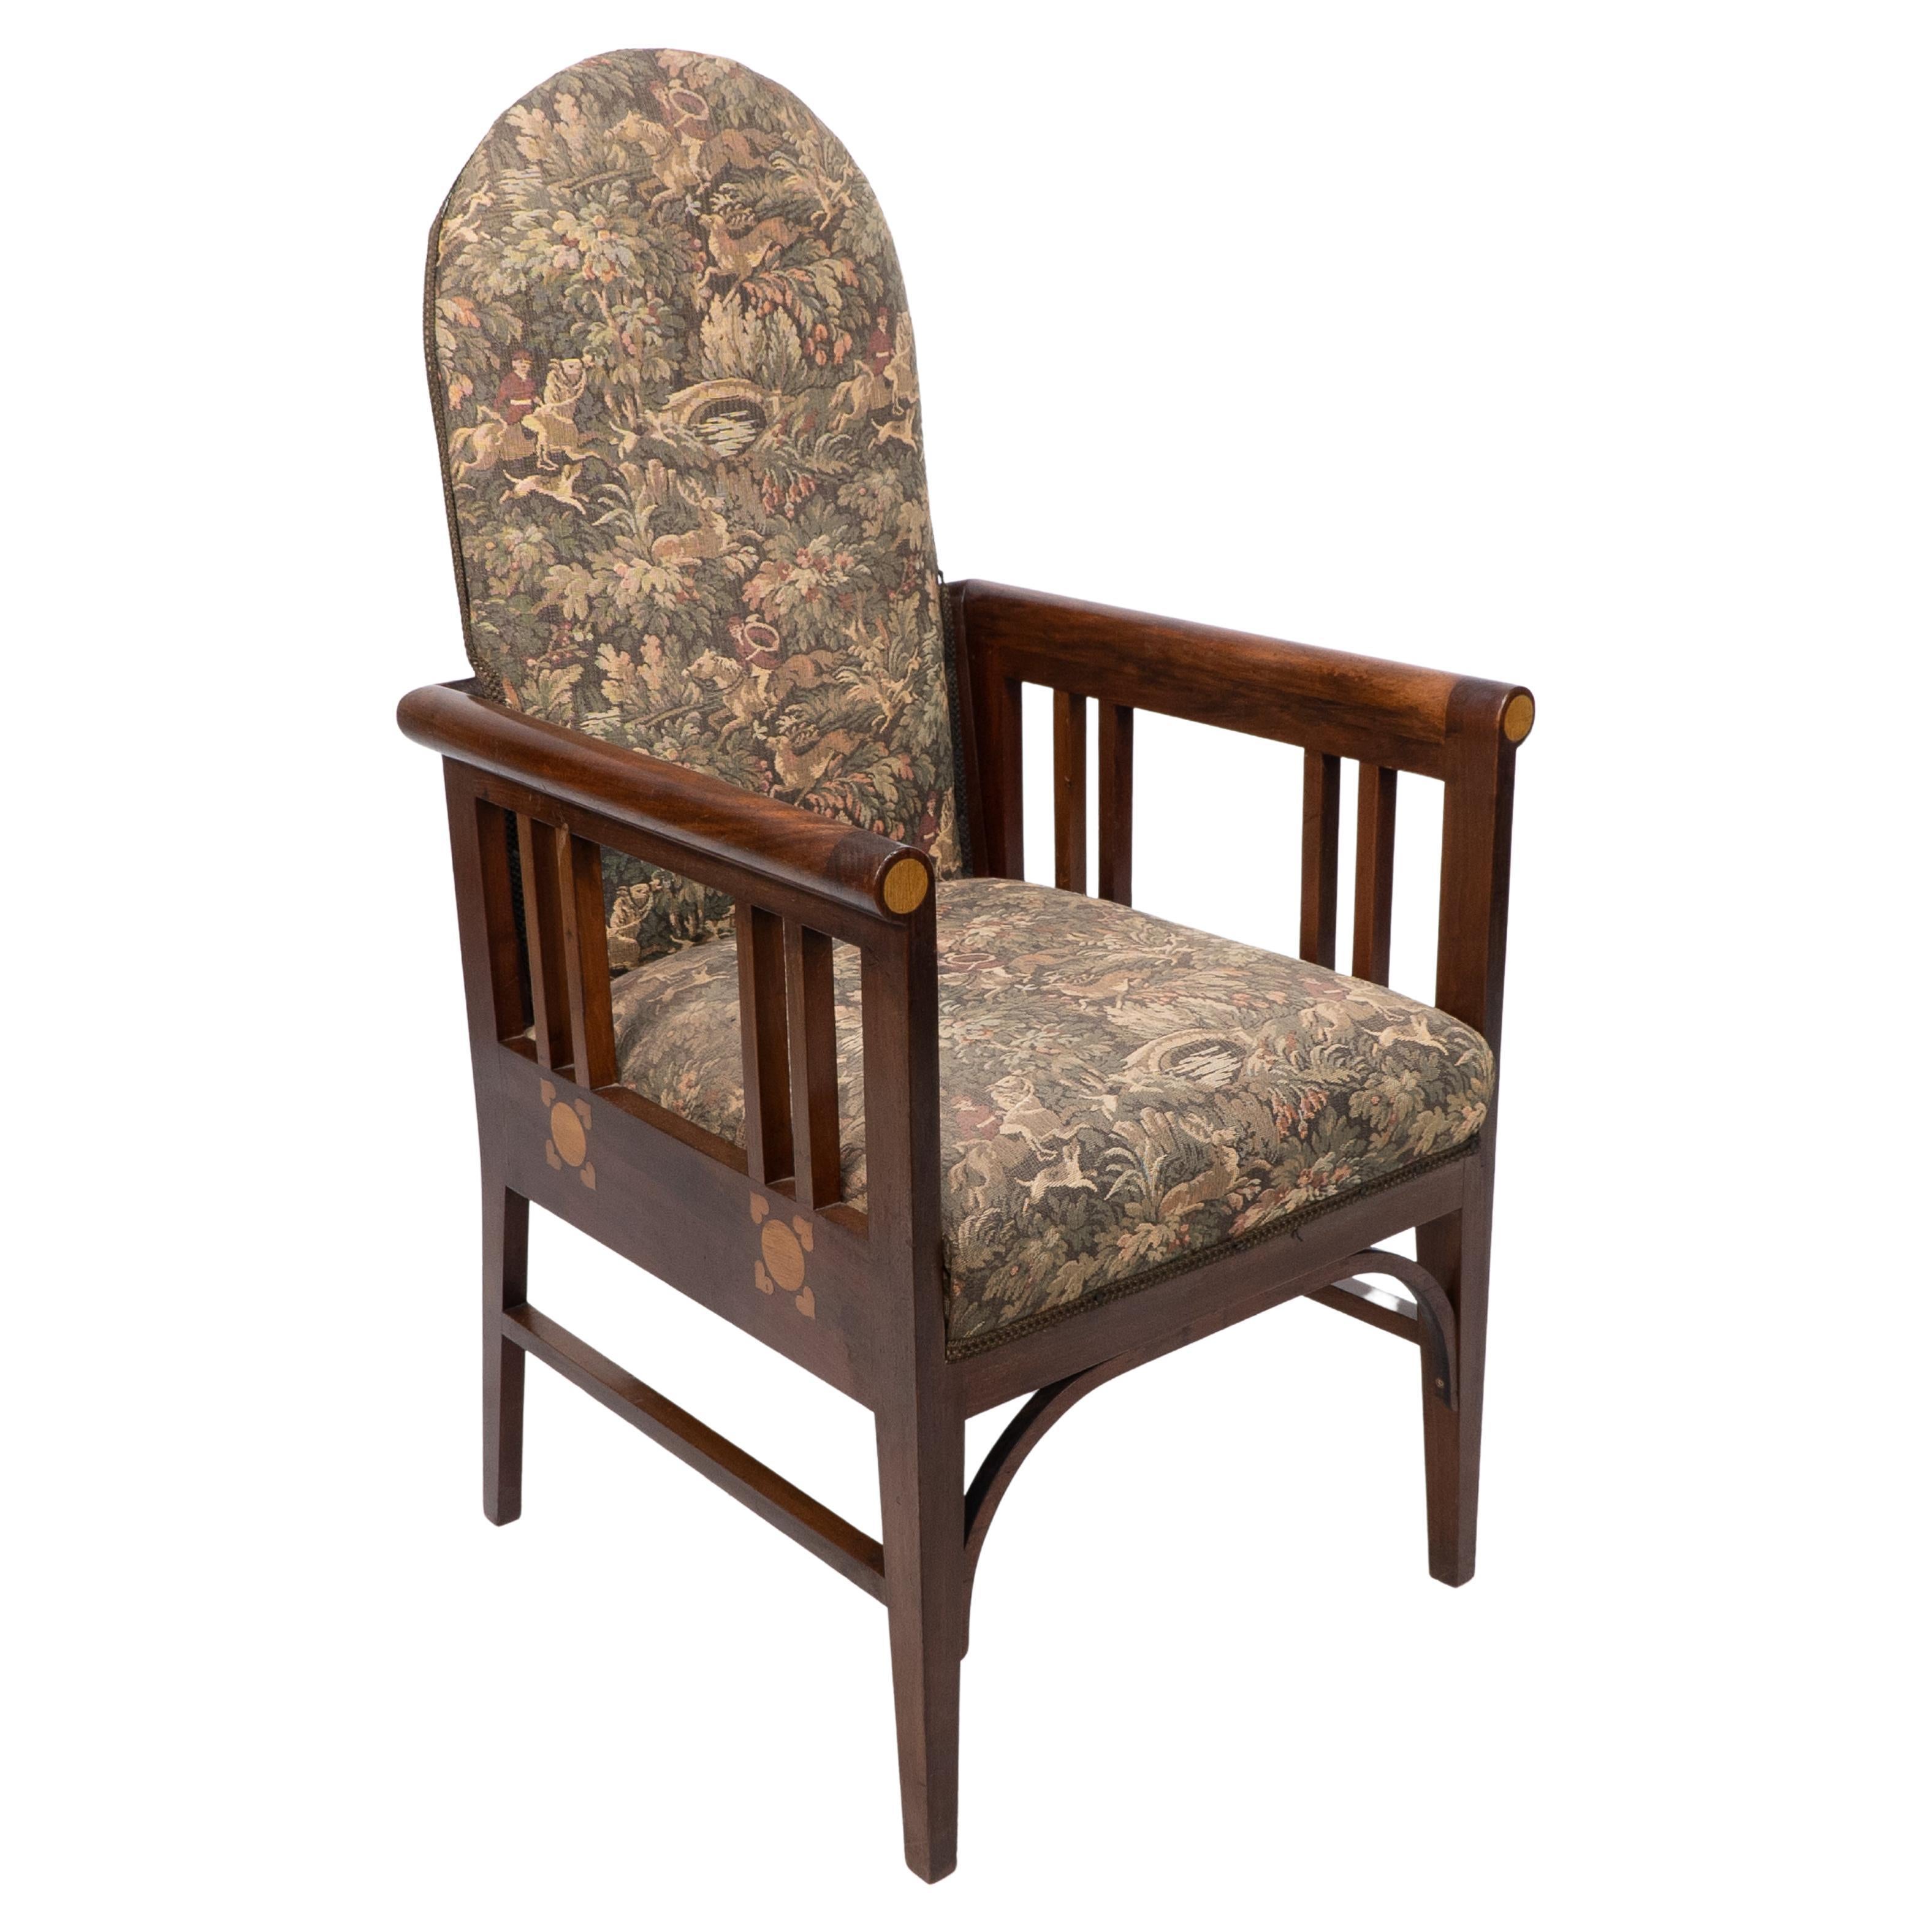 G M Ellwood for J S Henry. A Progressive New Art armchair with fruitwood inlays For Sale